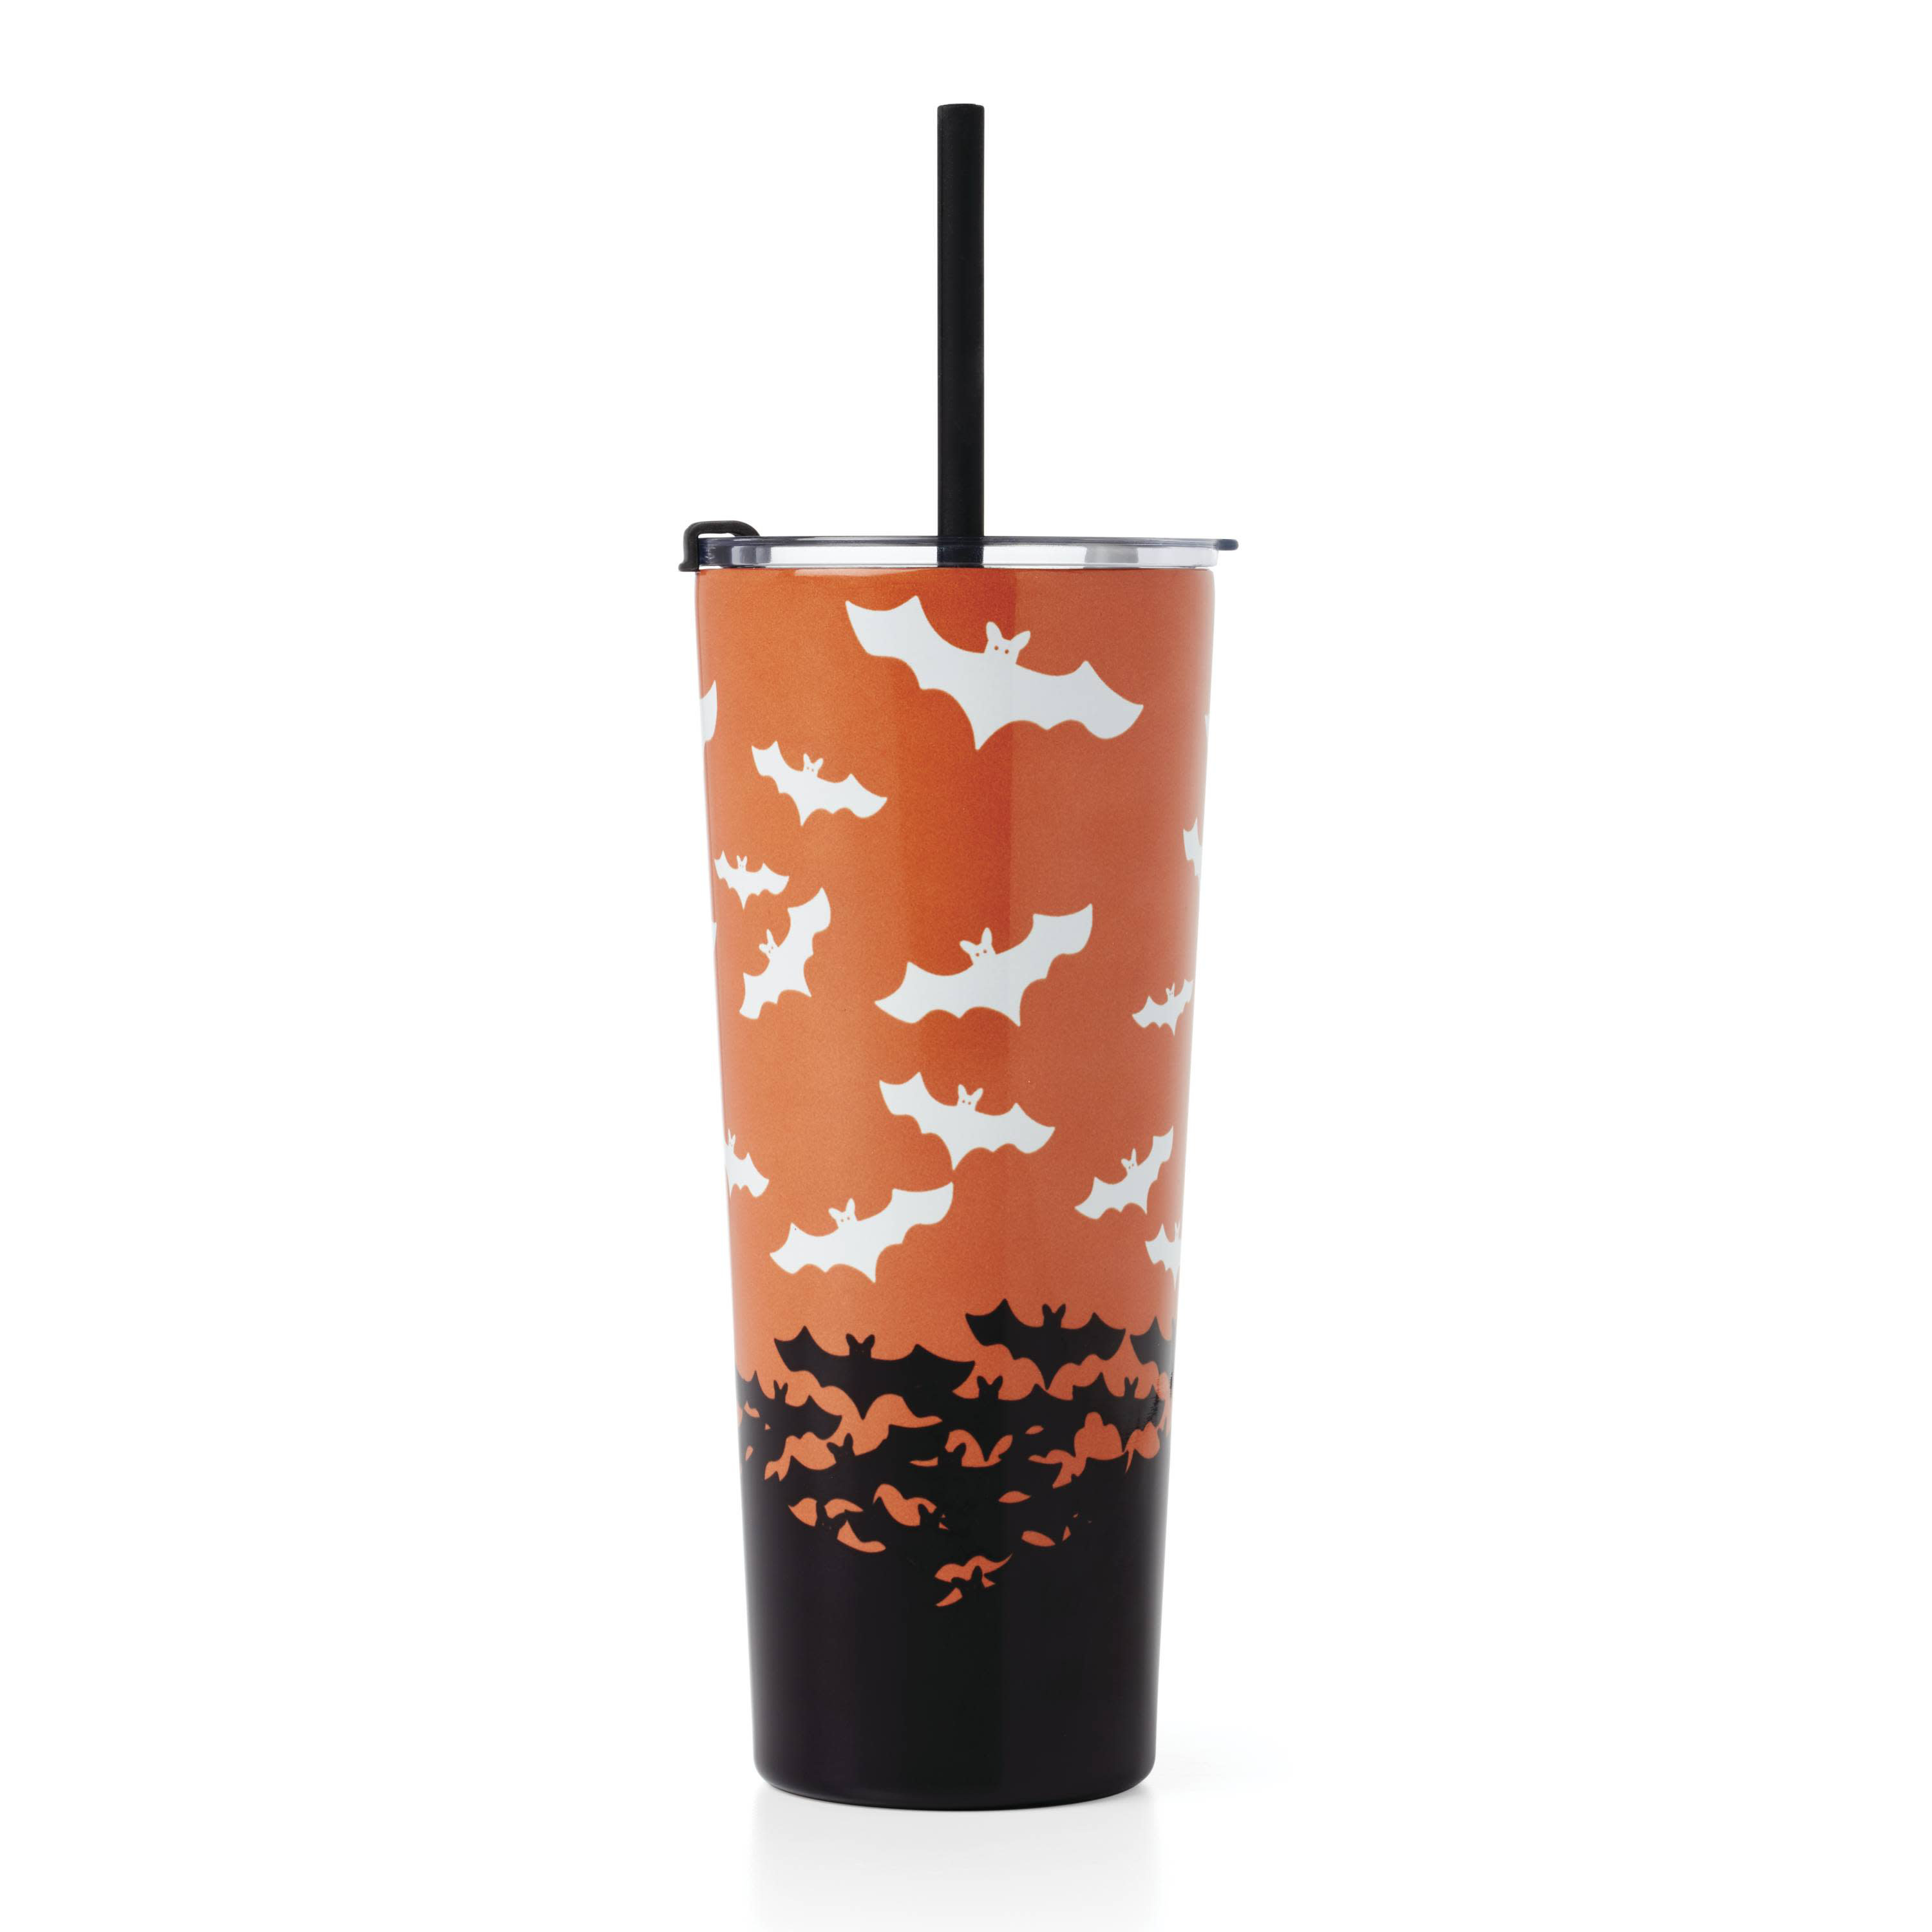 Cambridge Witch Candy Insulated Tumbler with Straw, 24 oz - Black